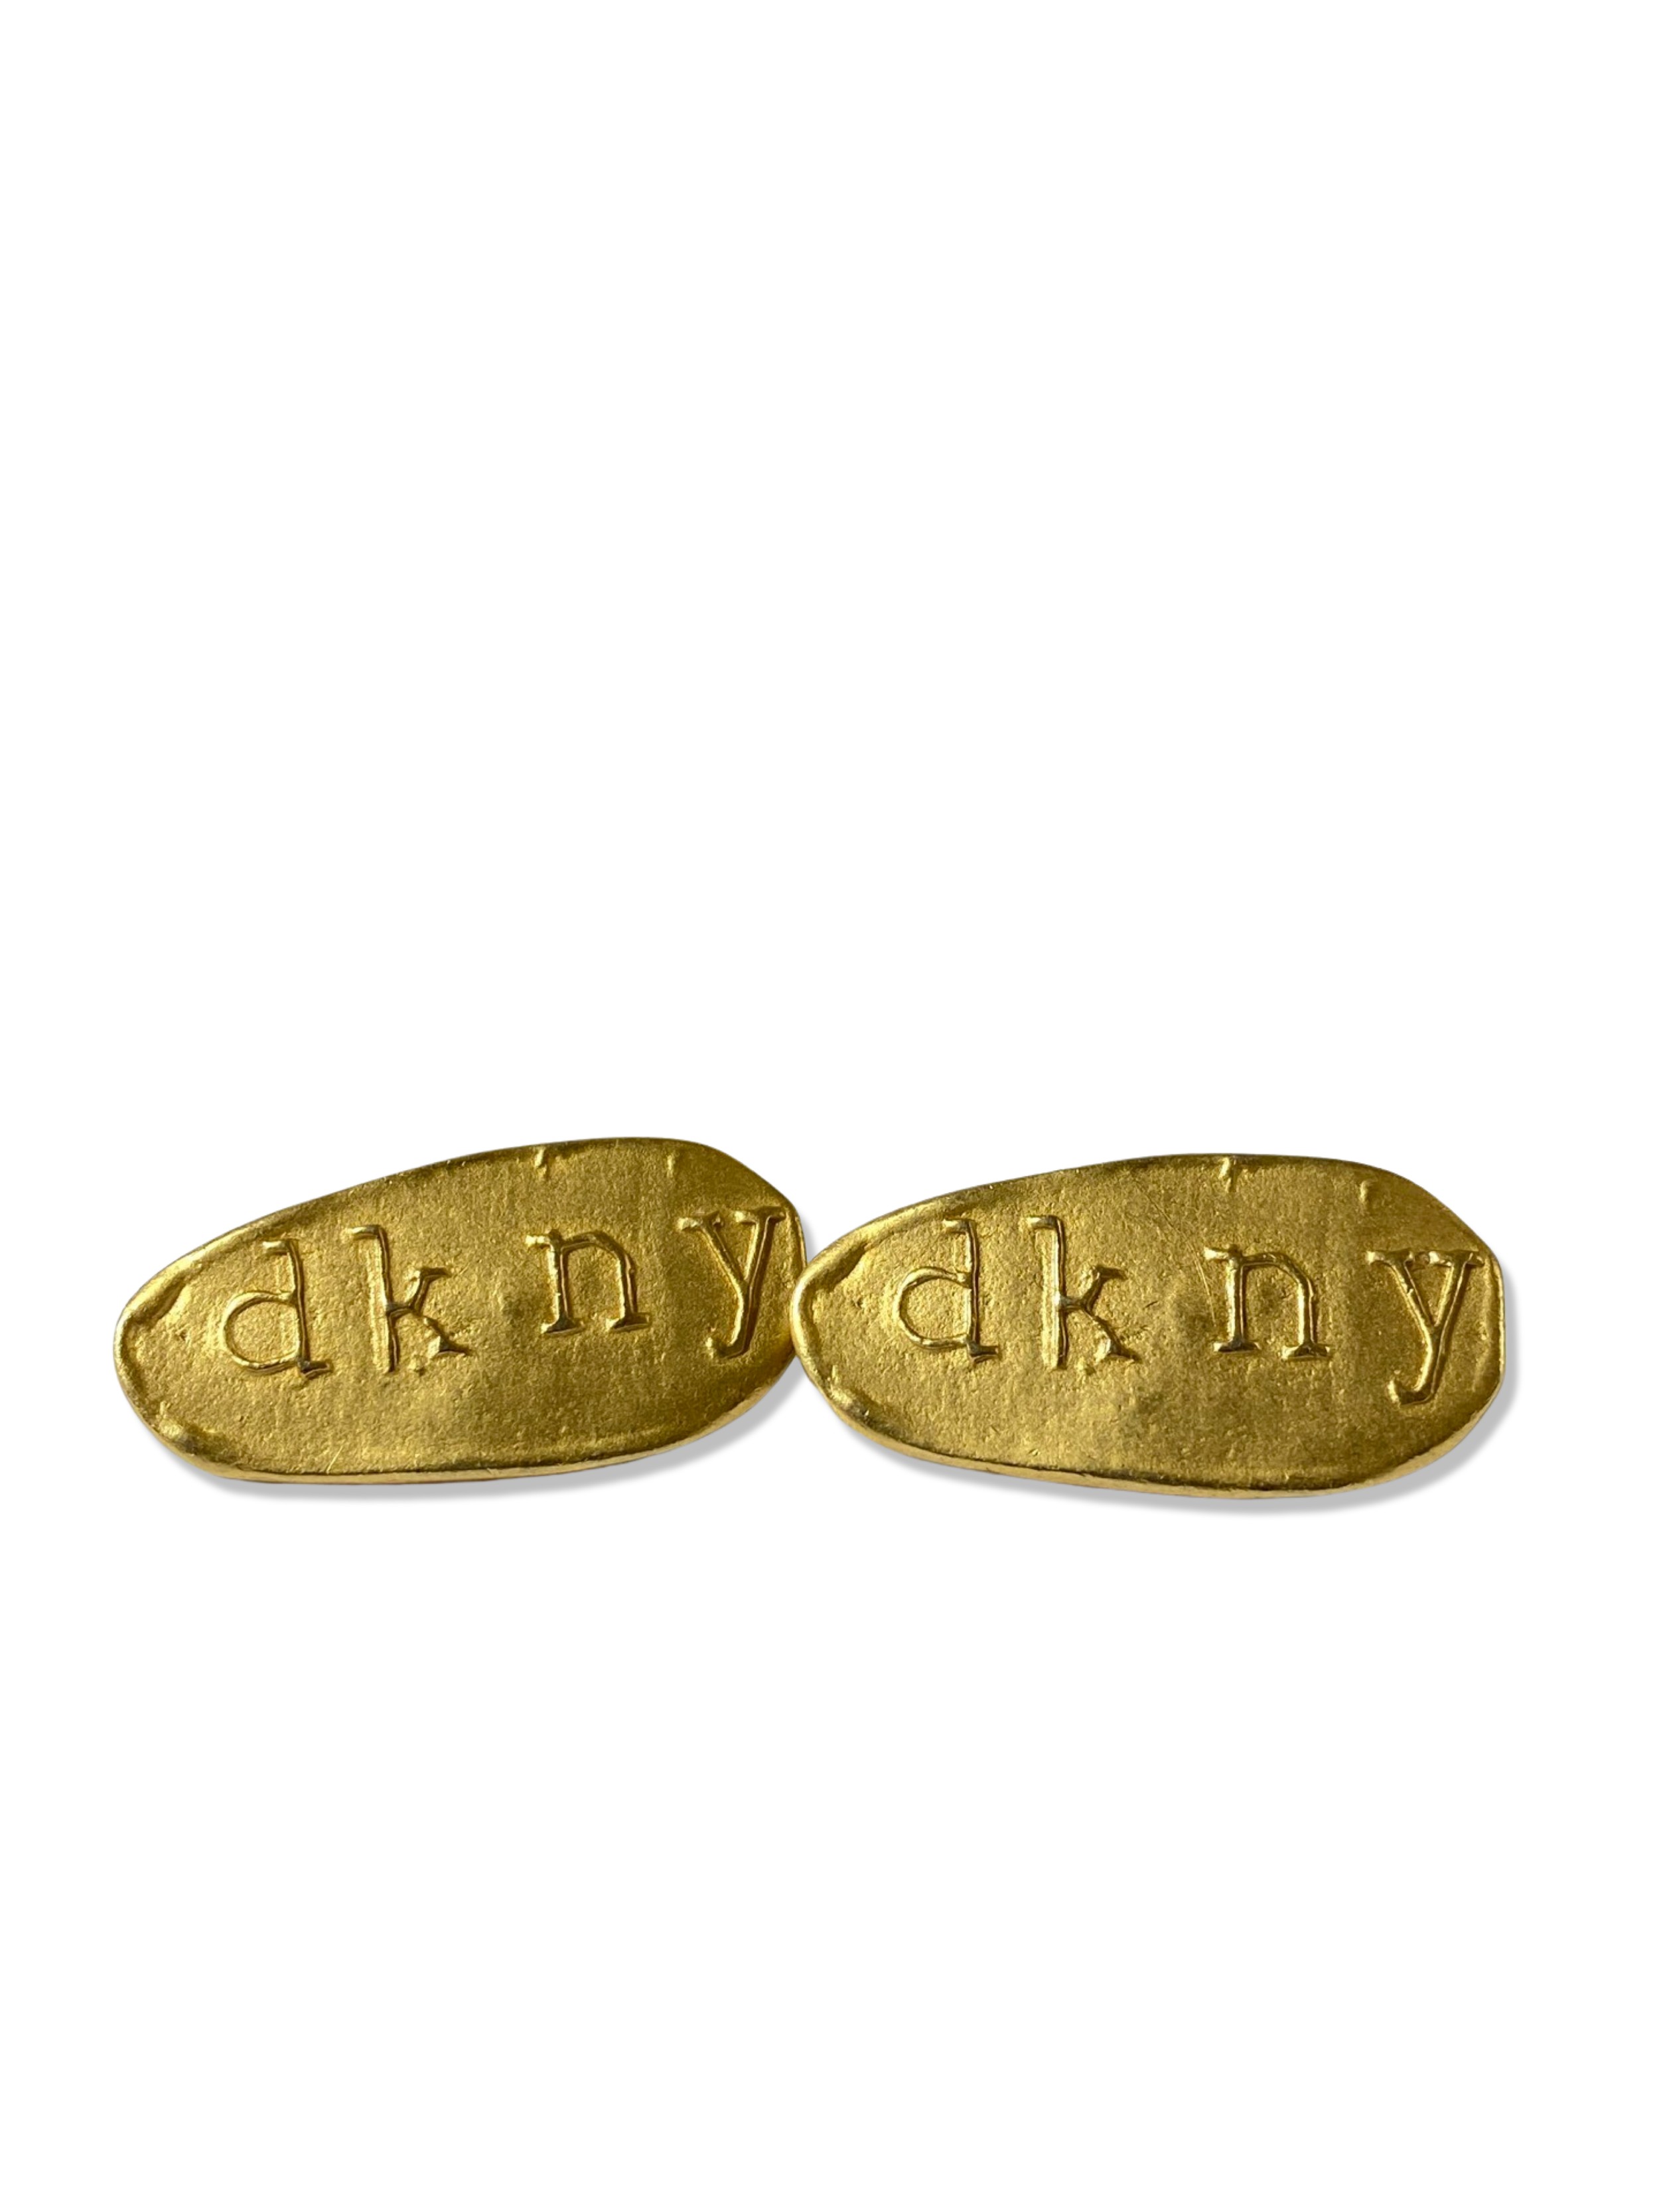 DKNY Gold Tone Clip-on Earrings weighing 12.56 grams